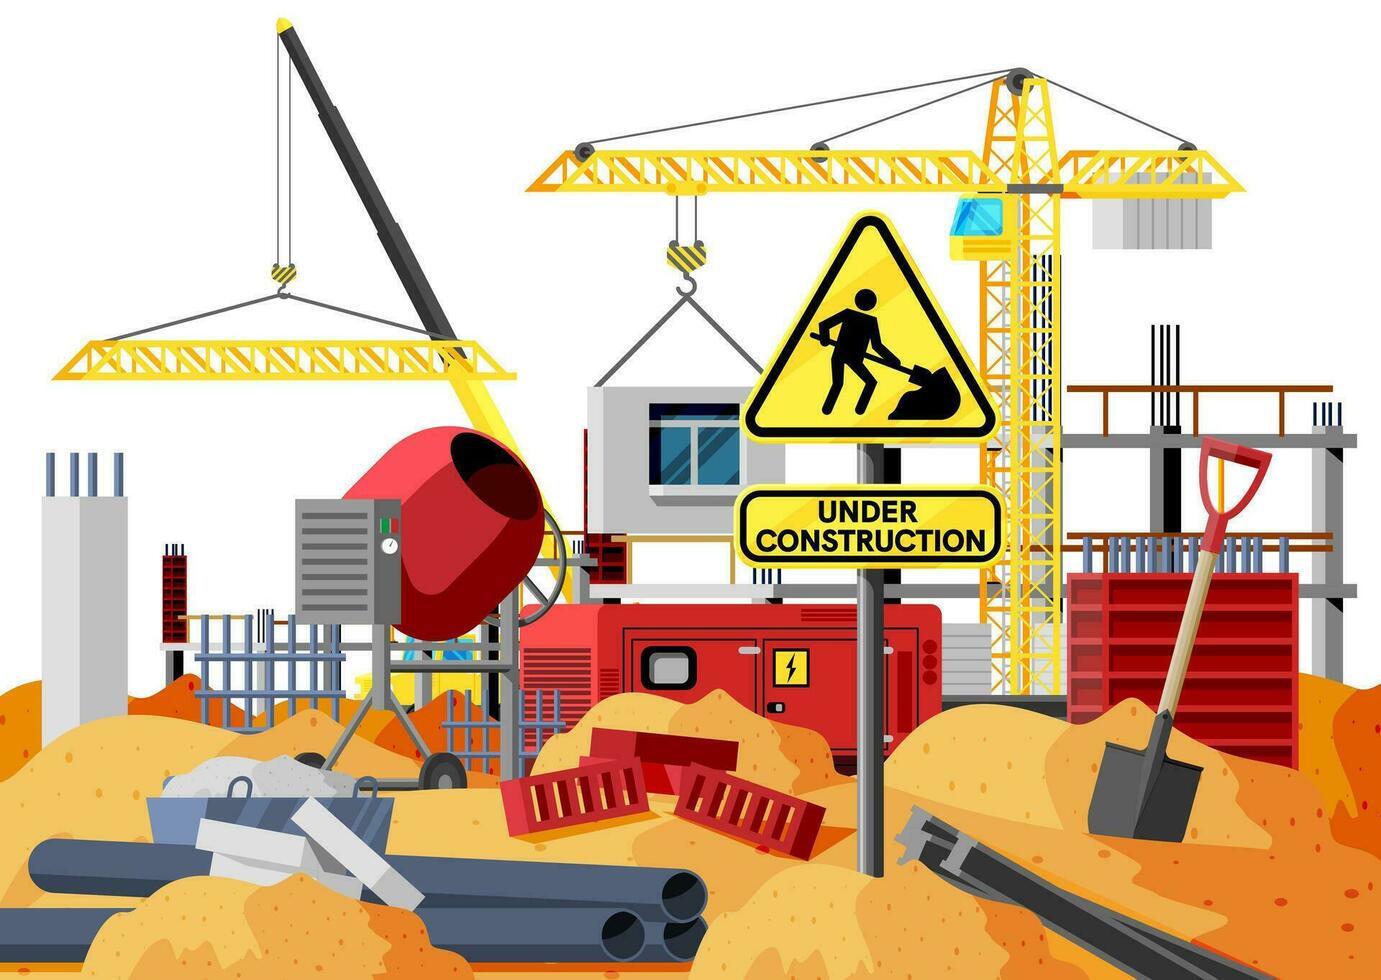 Construction Site Banner. Concrete Mixer, Shovel, Tower Crane and Bricks in Pile of Sand. Under Construction Design Background. Building Materials and Equipment. Cartoon Flat Vector Illustration